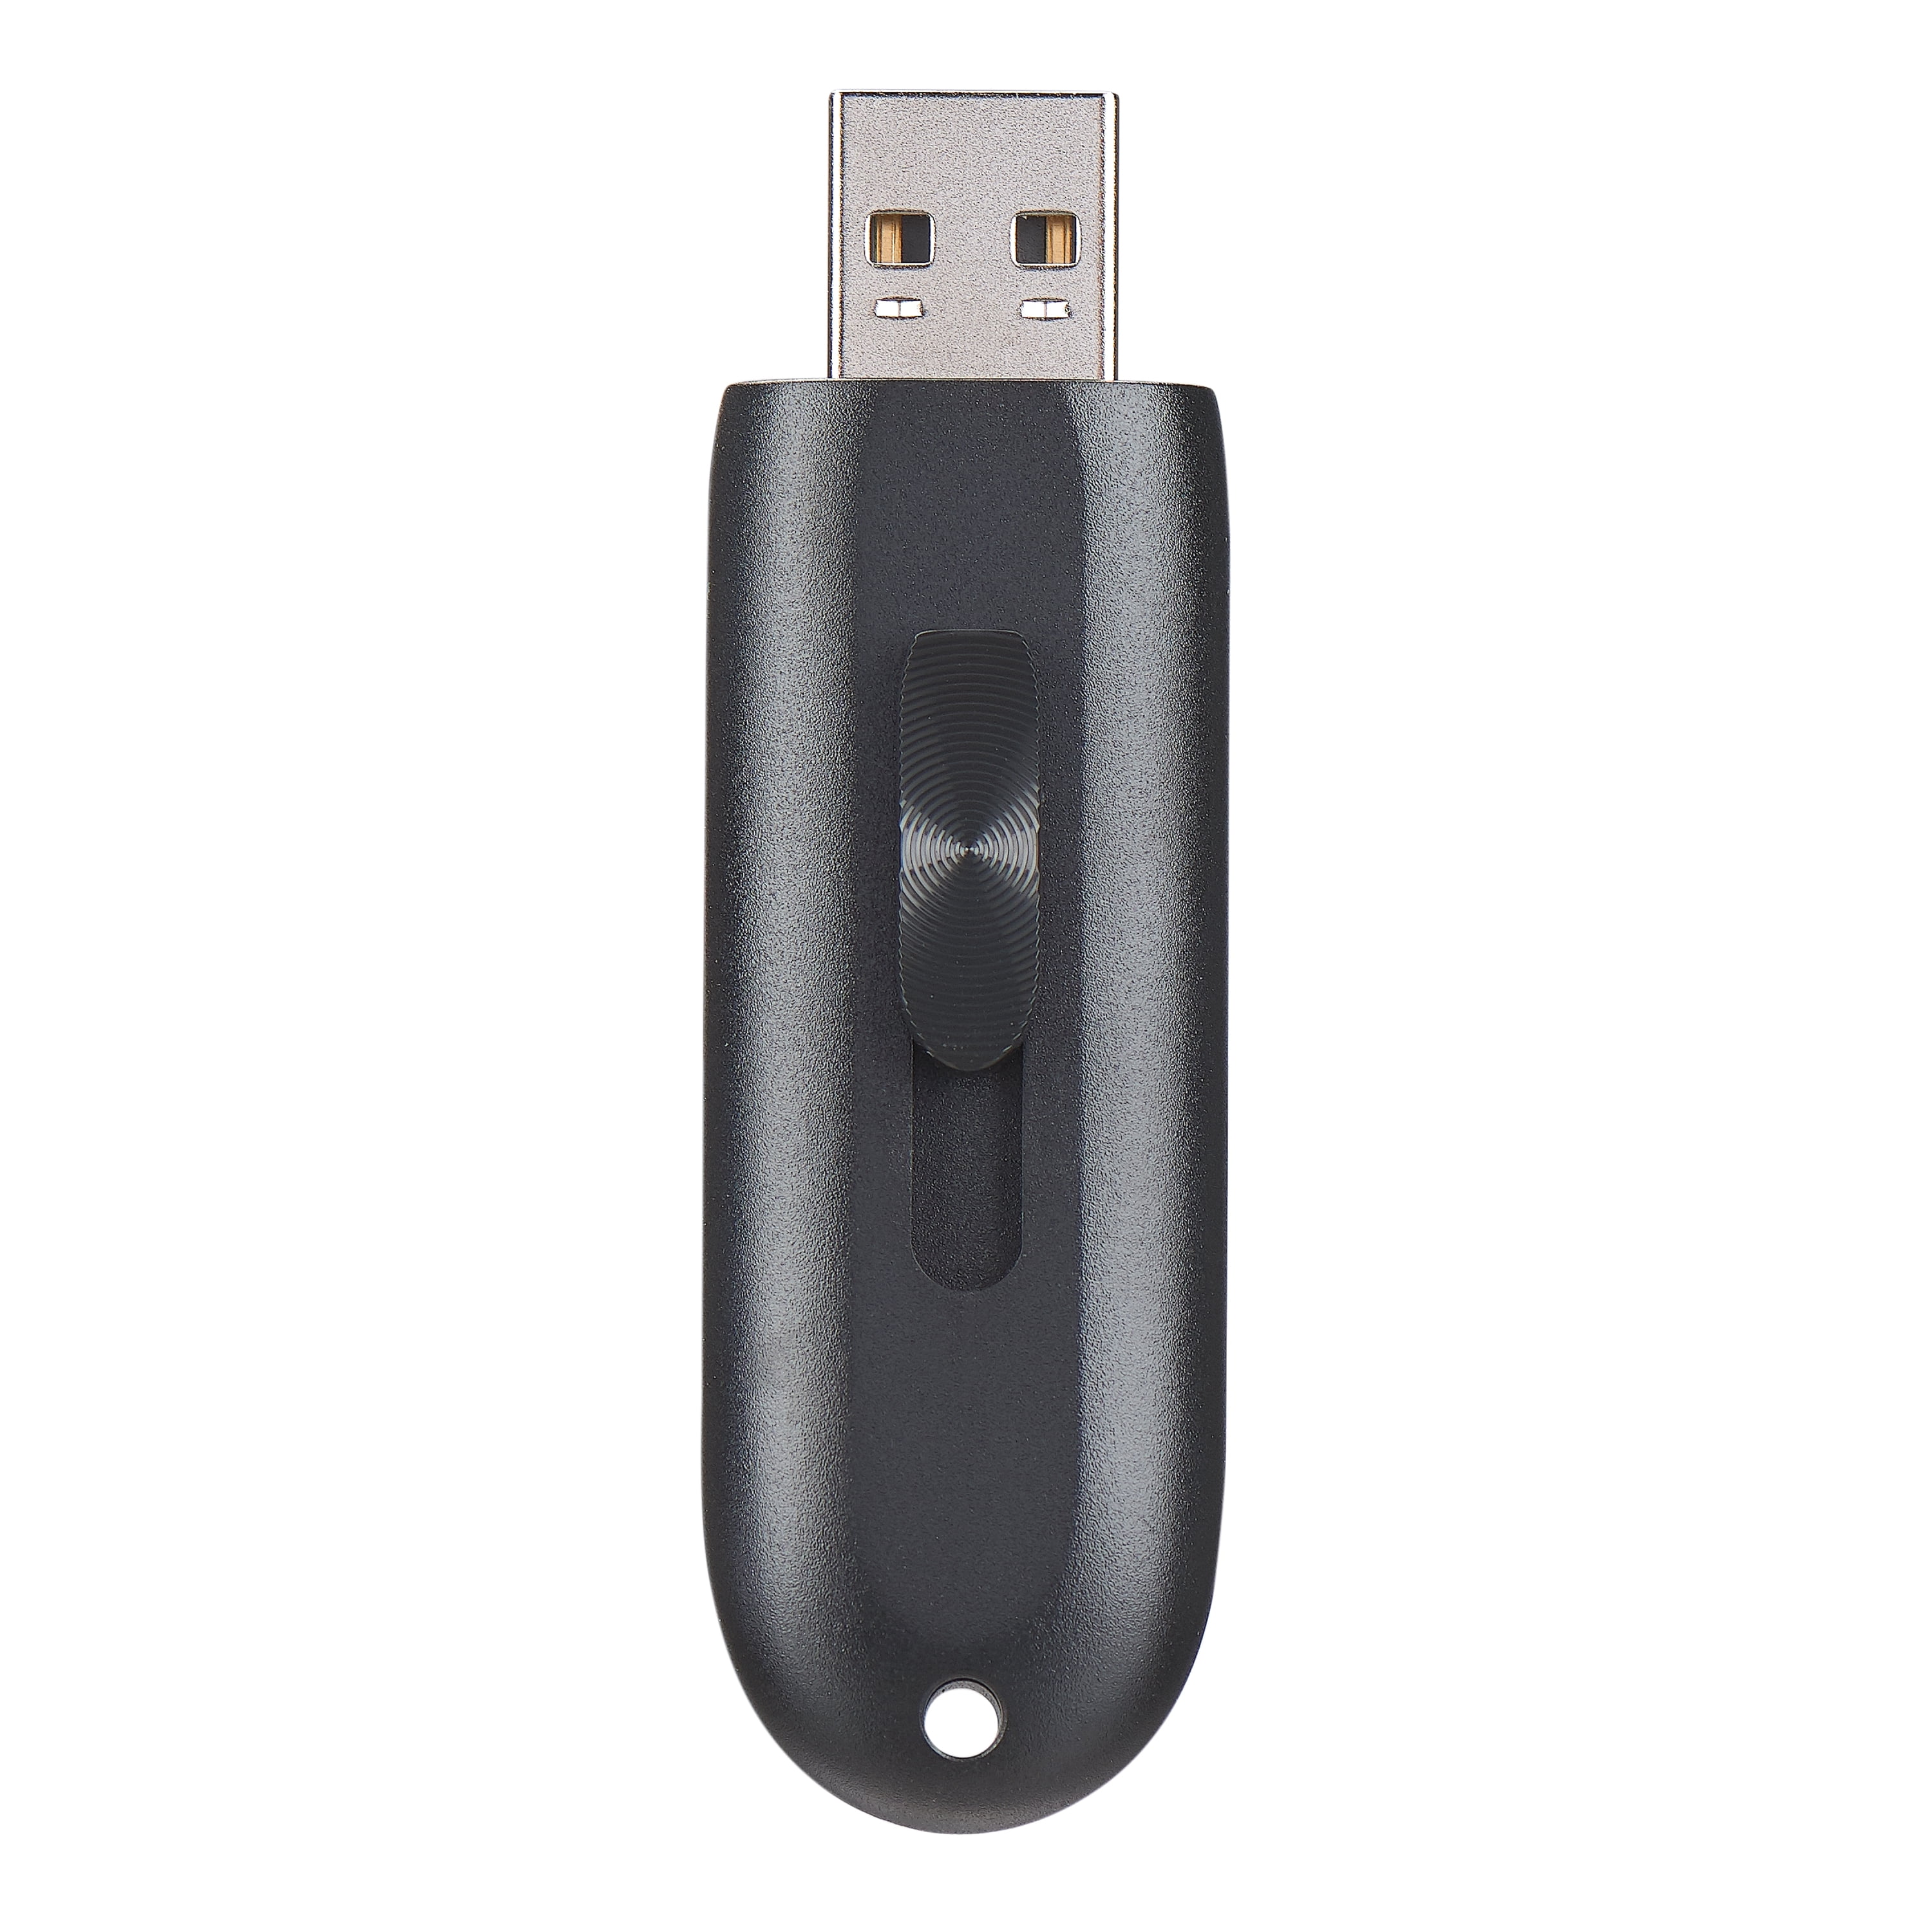 Onn. USB 2.0 Flash Drive for Tablets and Computers, 64 GB Capacity